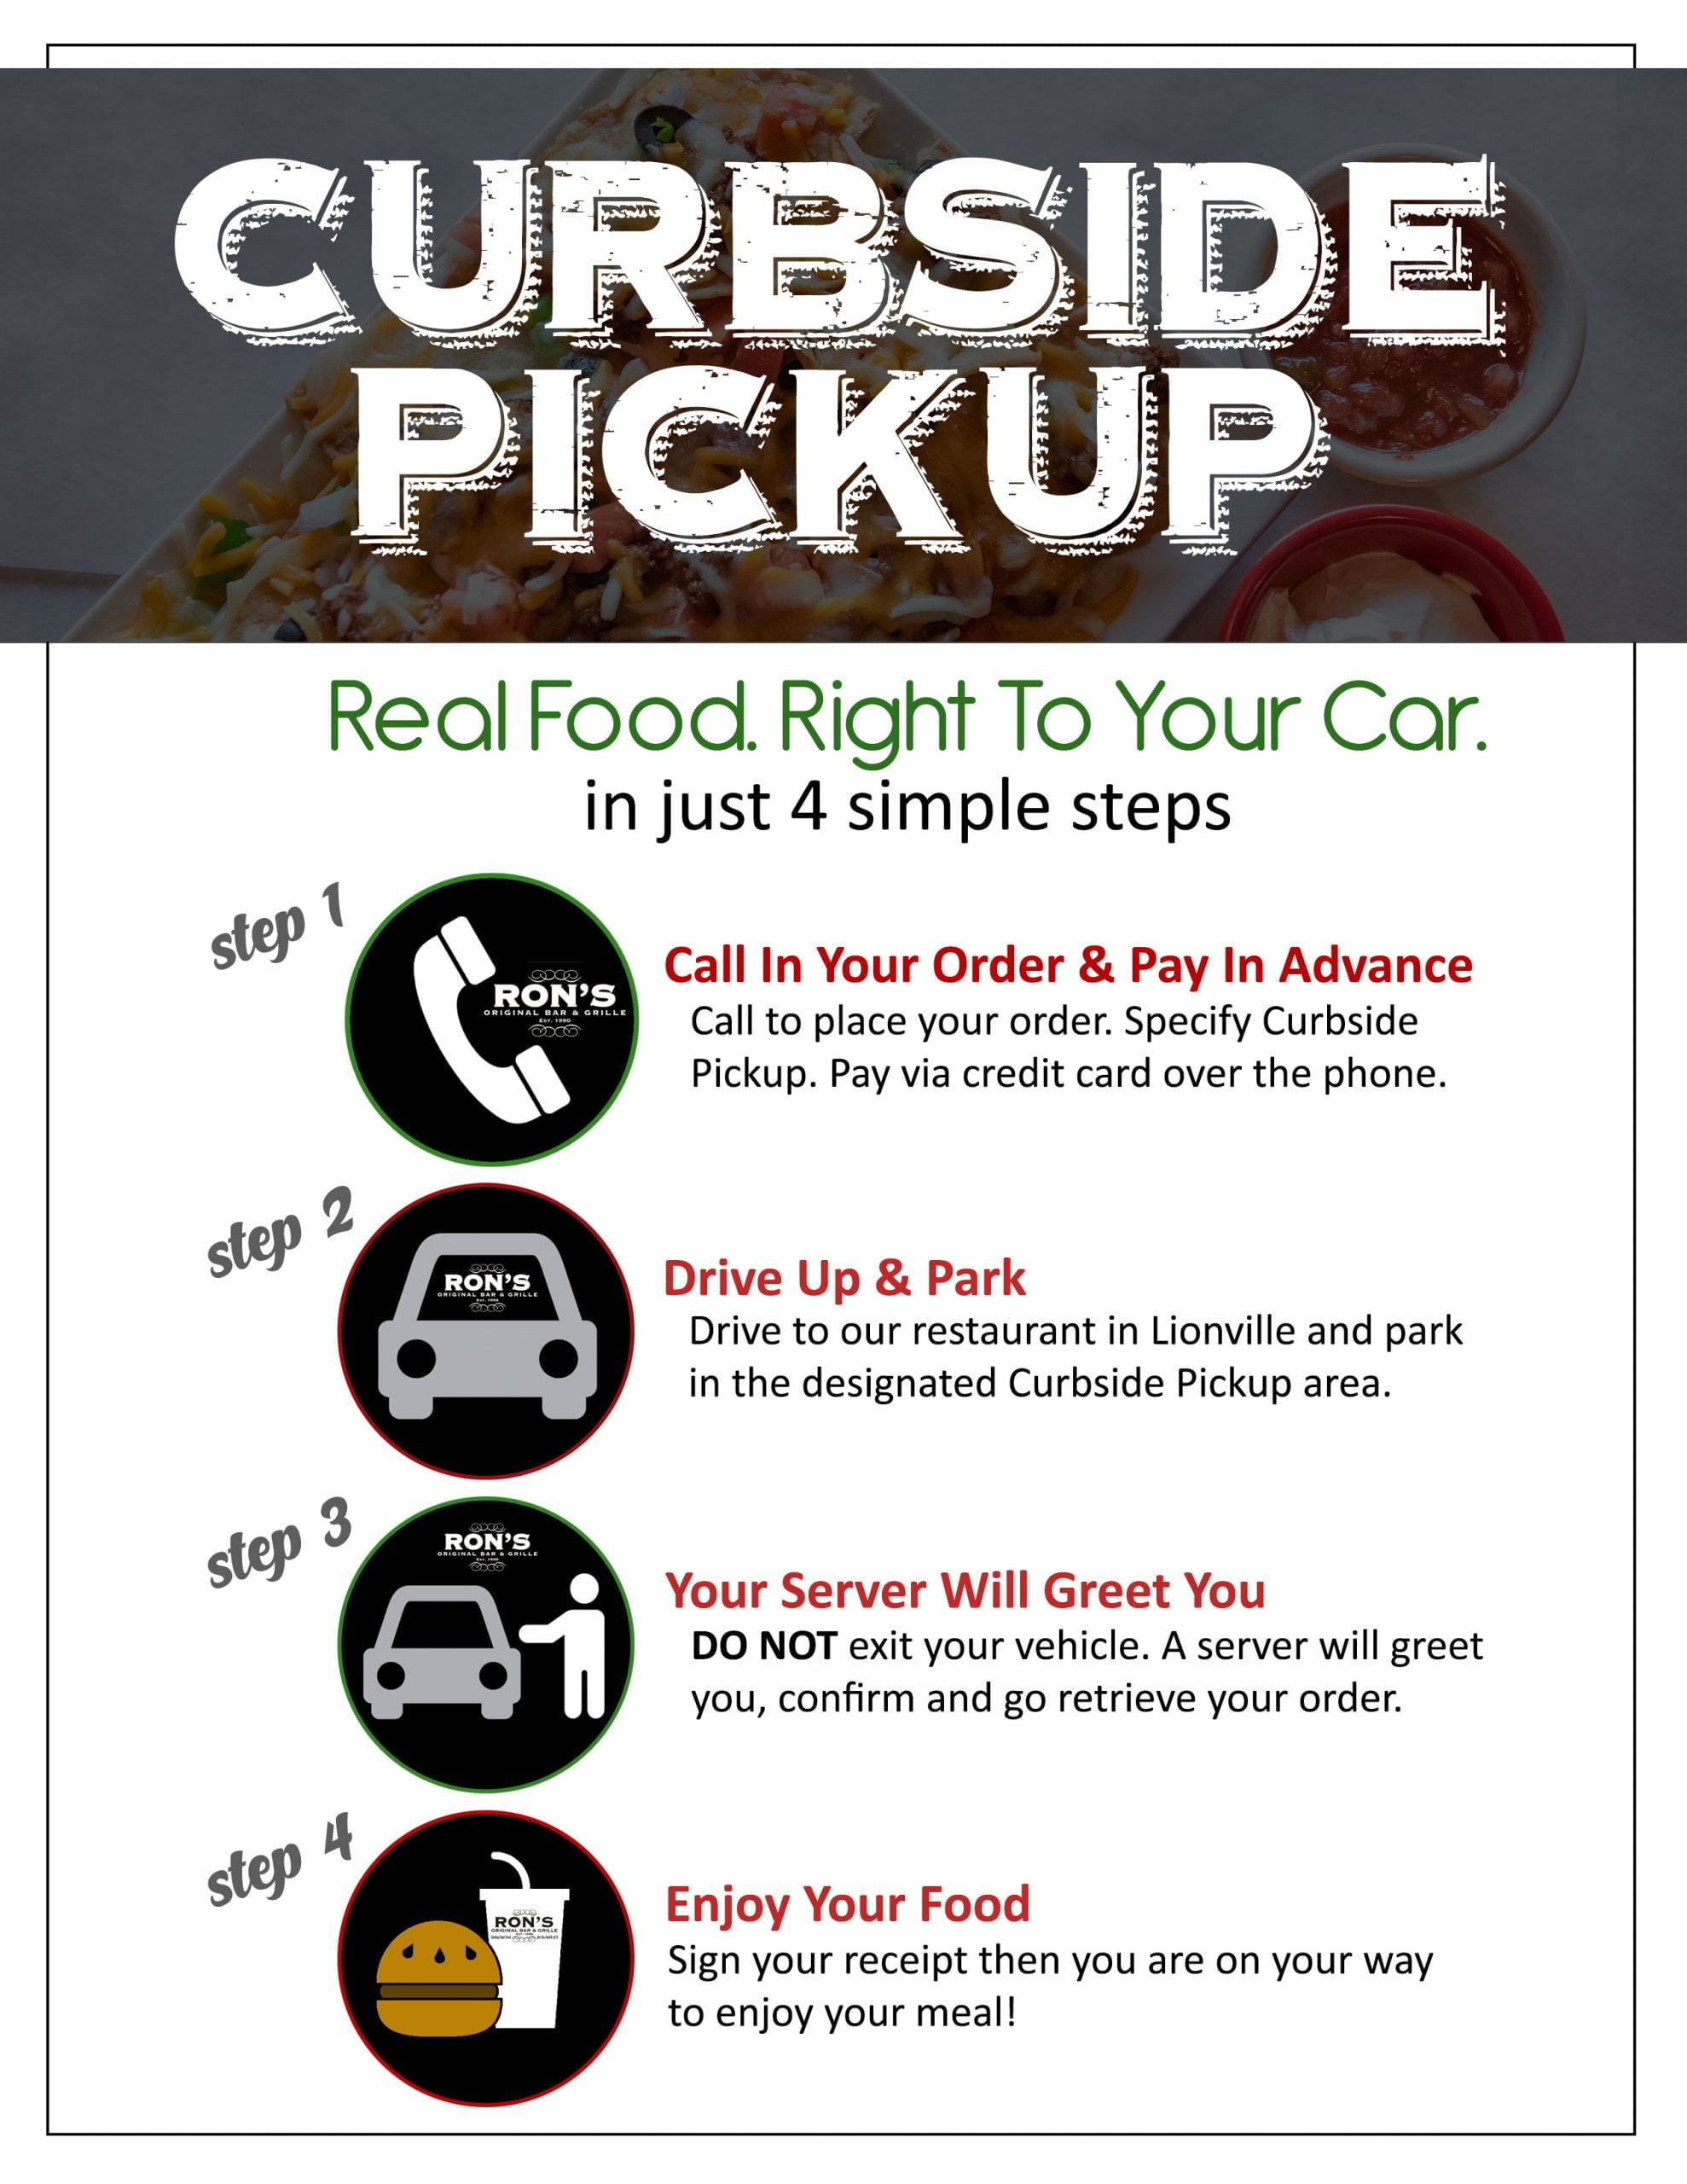 Curbside Pickup Instructions / How To's